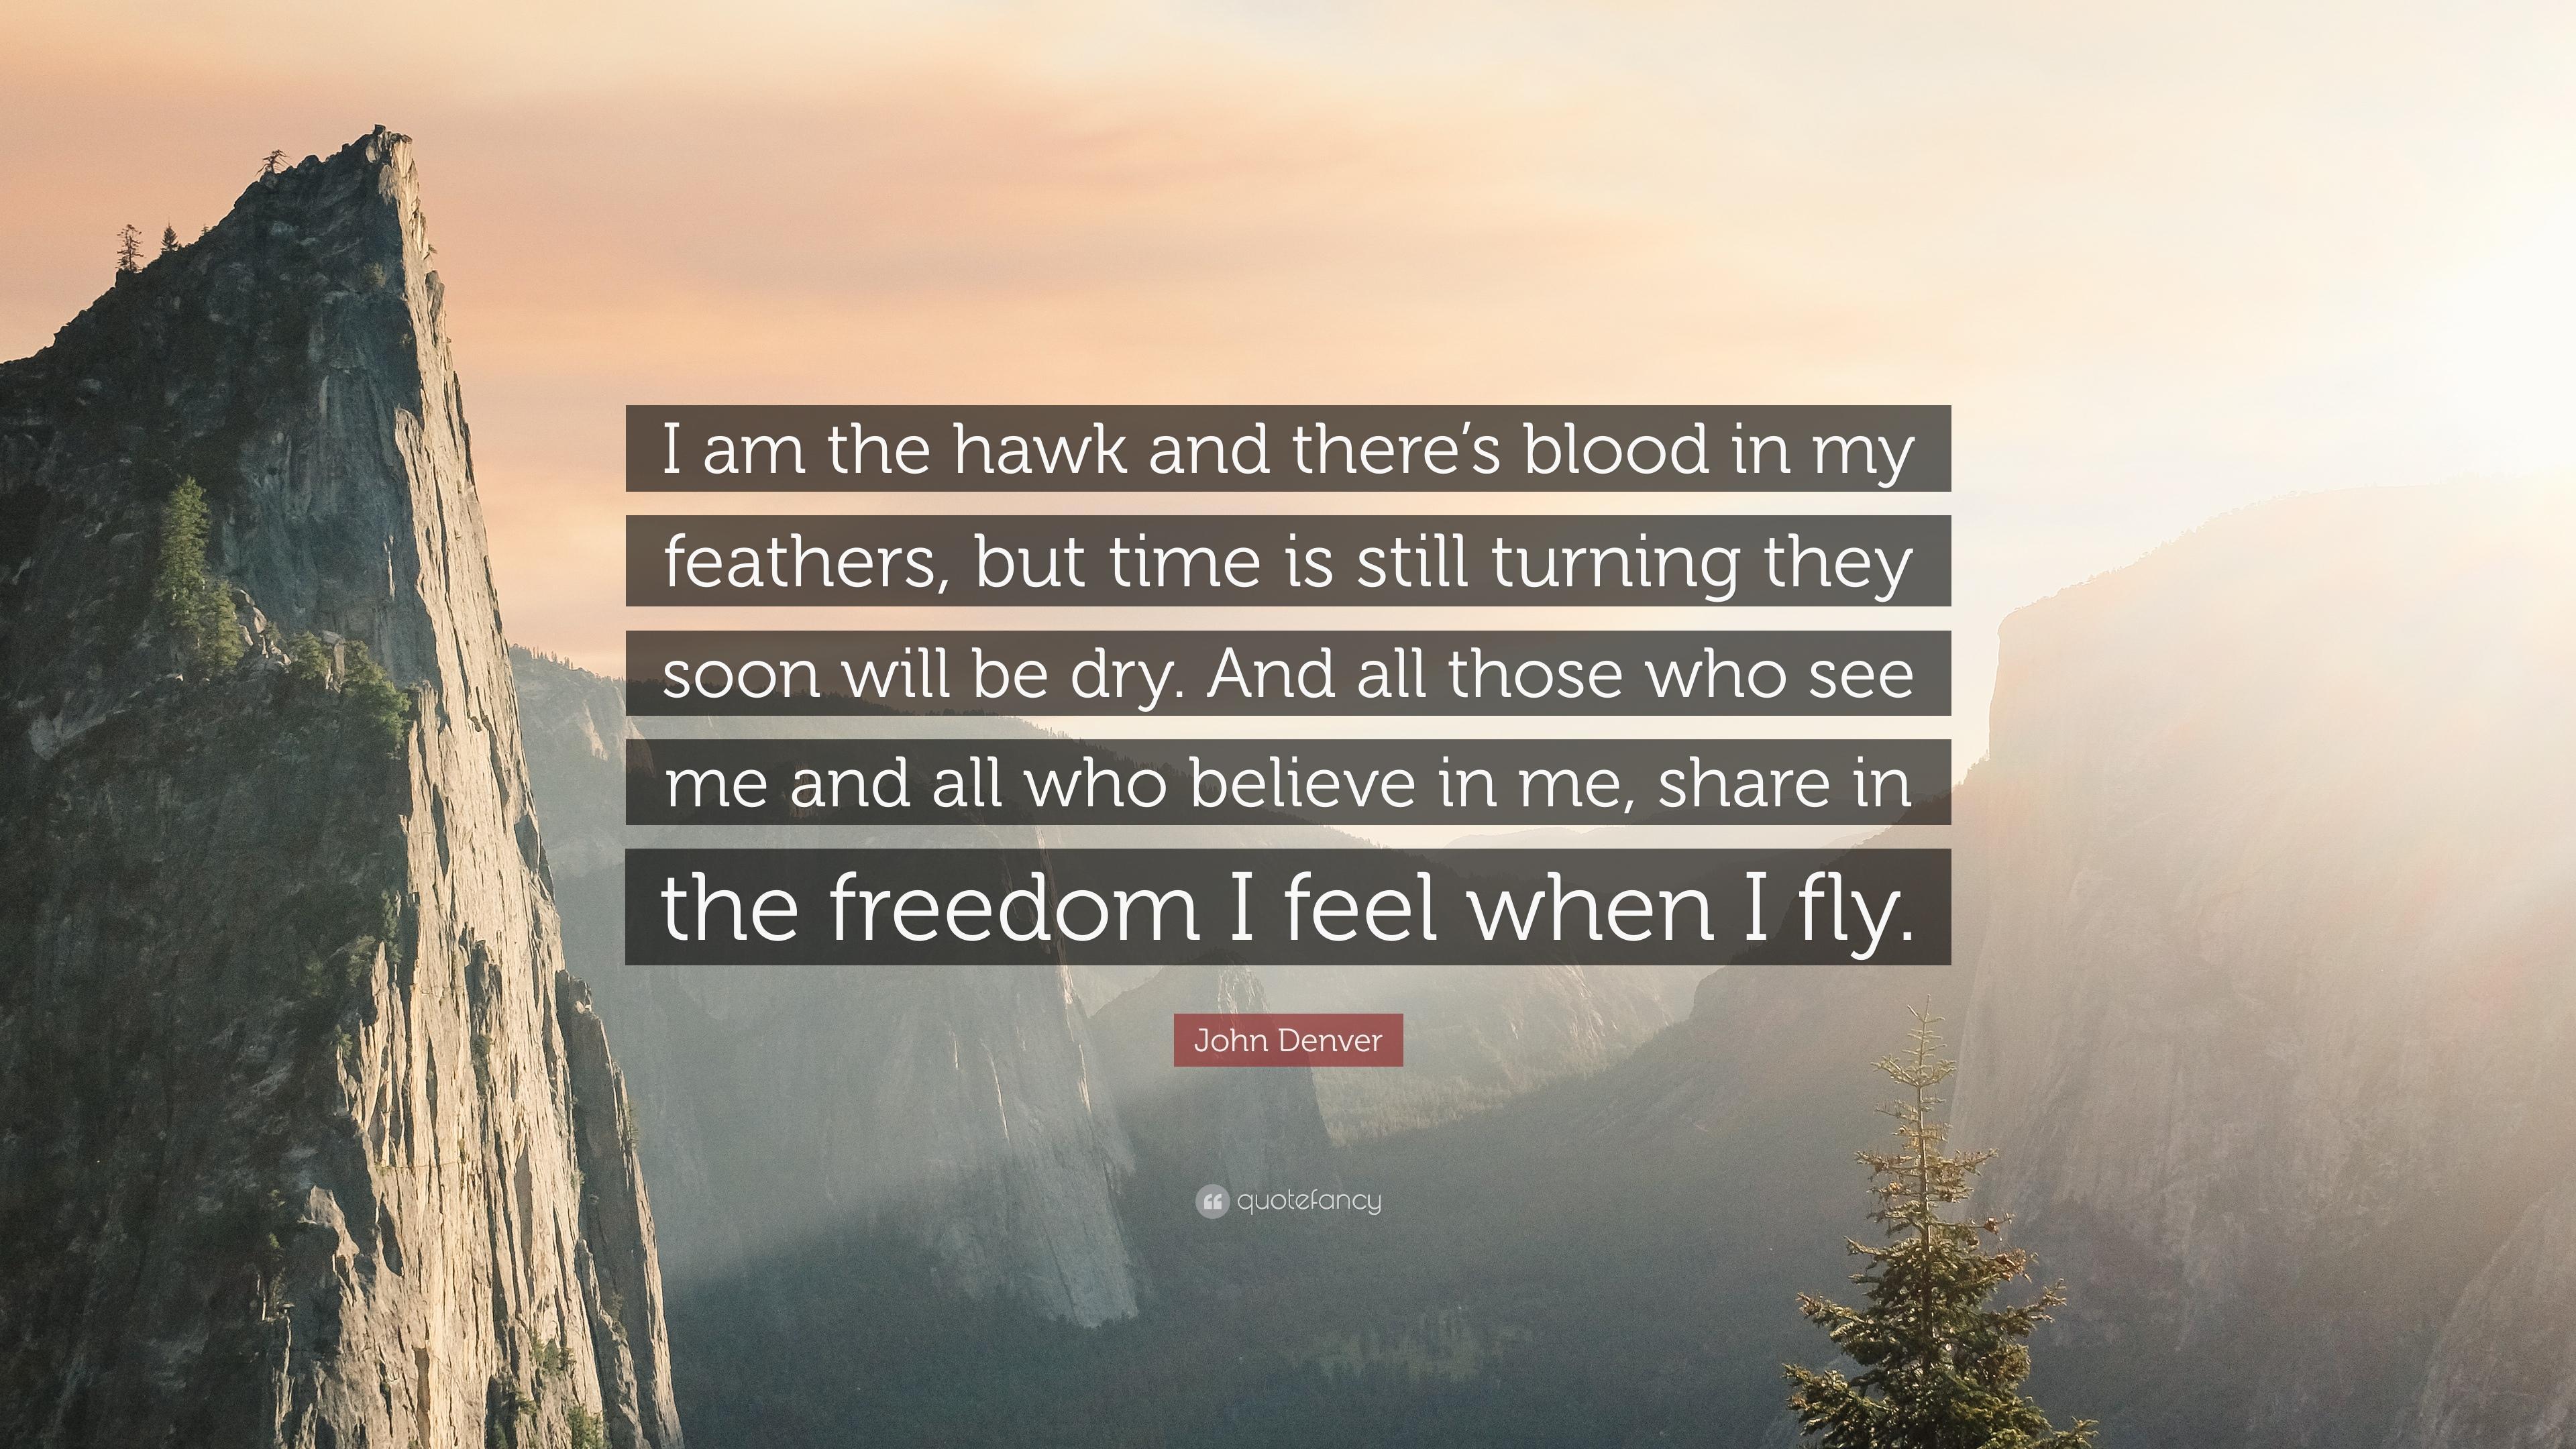 John Denver Quote: “I am the hawk and there's blood in my feathers